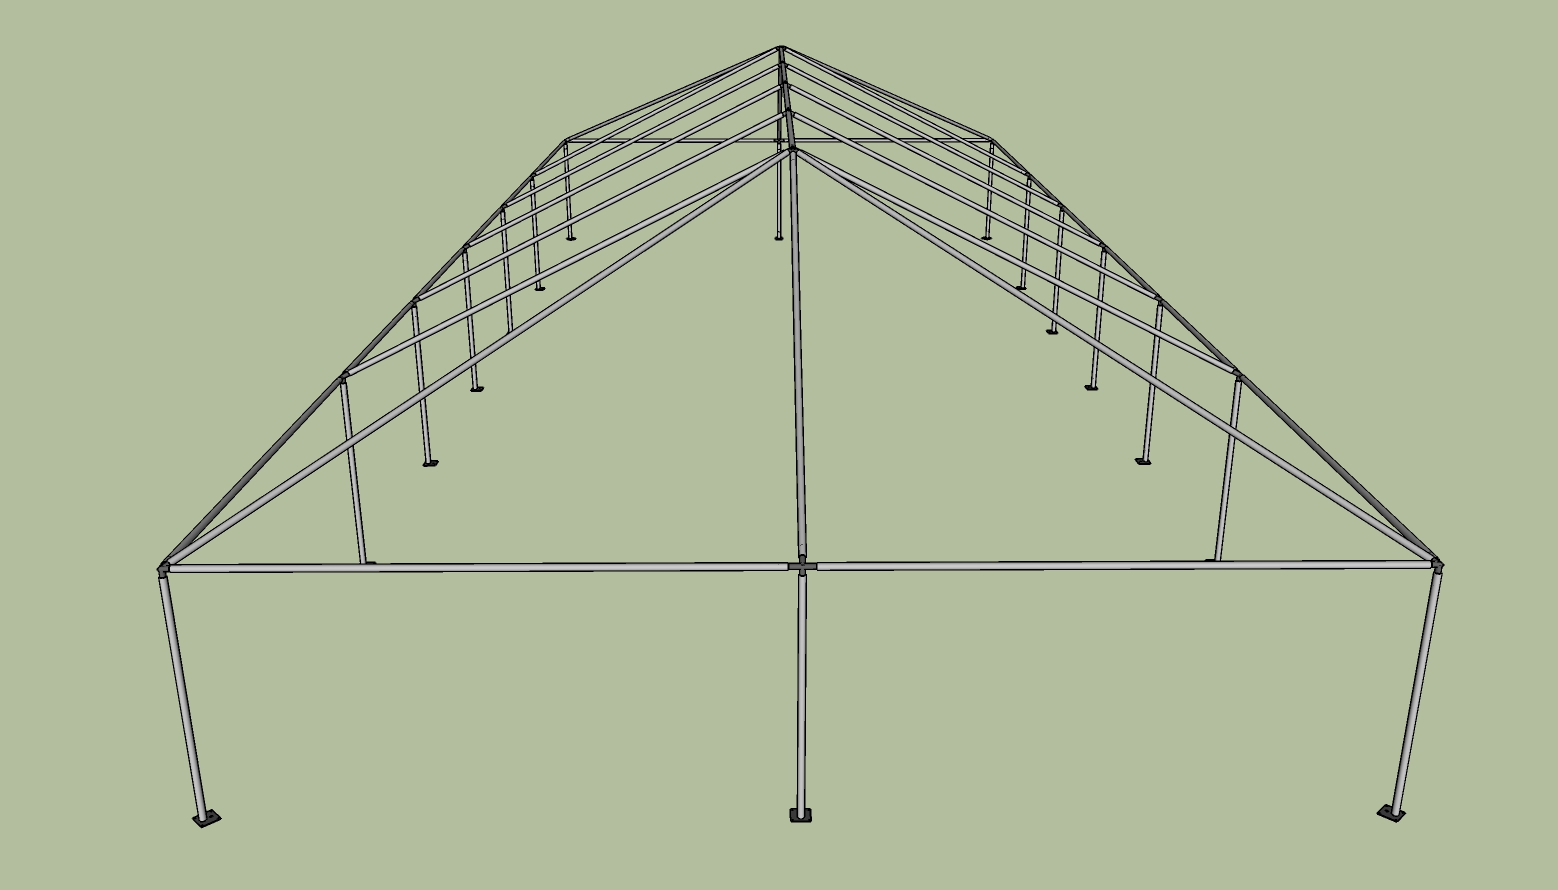 30x70 frame tent side view